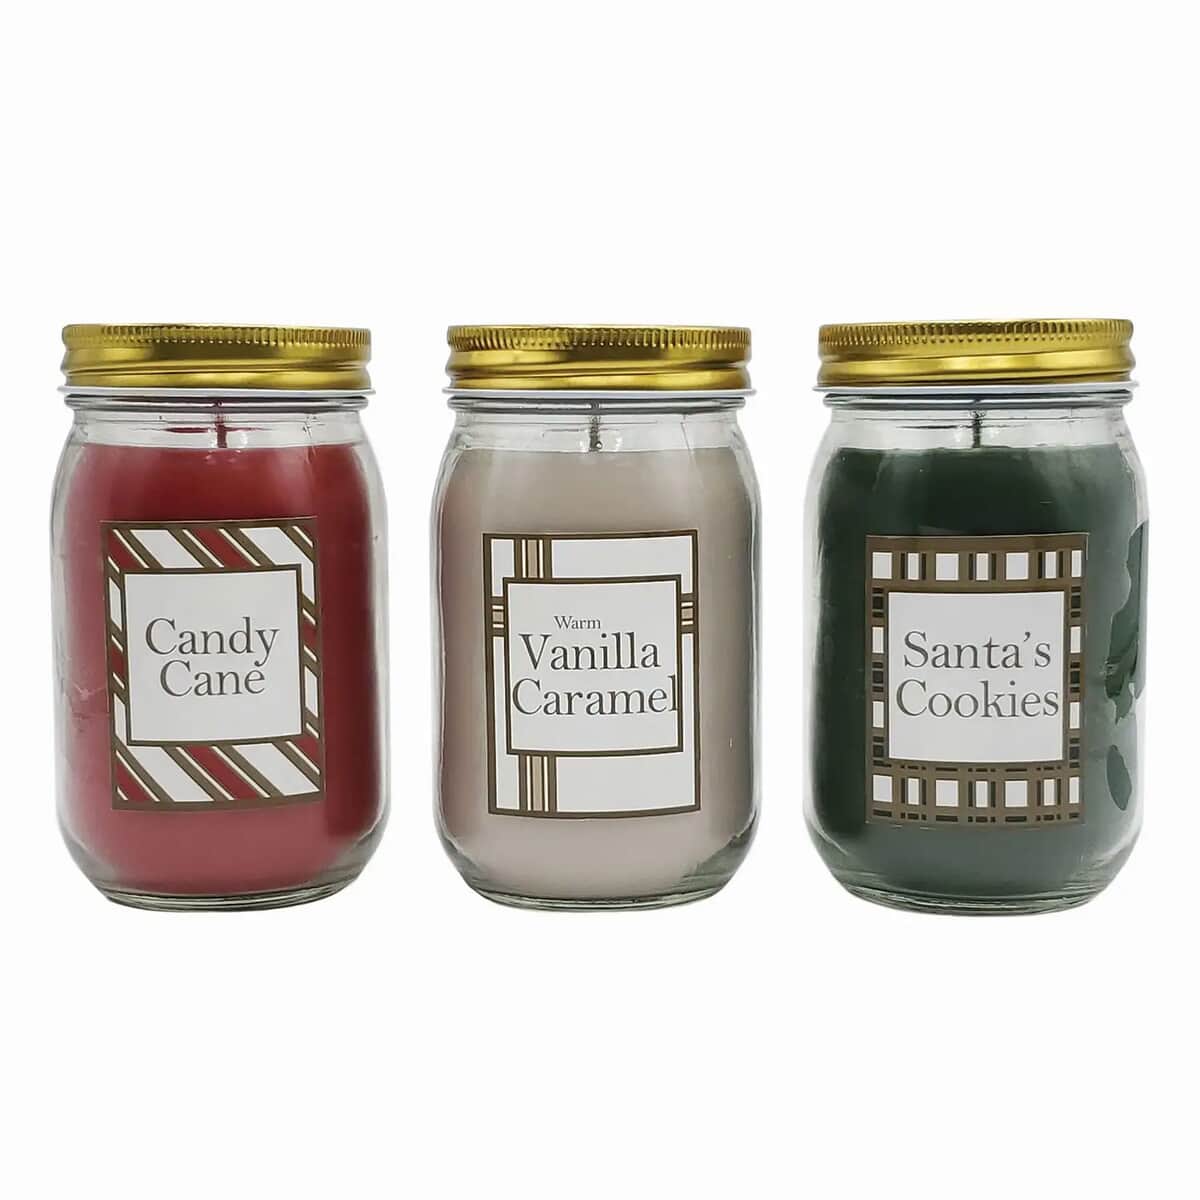 Lumabase Holiday Sweets Scented Candle Collection Set of 3 Candles -Santa's Cookies, Warm Vanilla Caramel, and Candy Cane image number 0